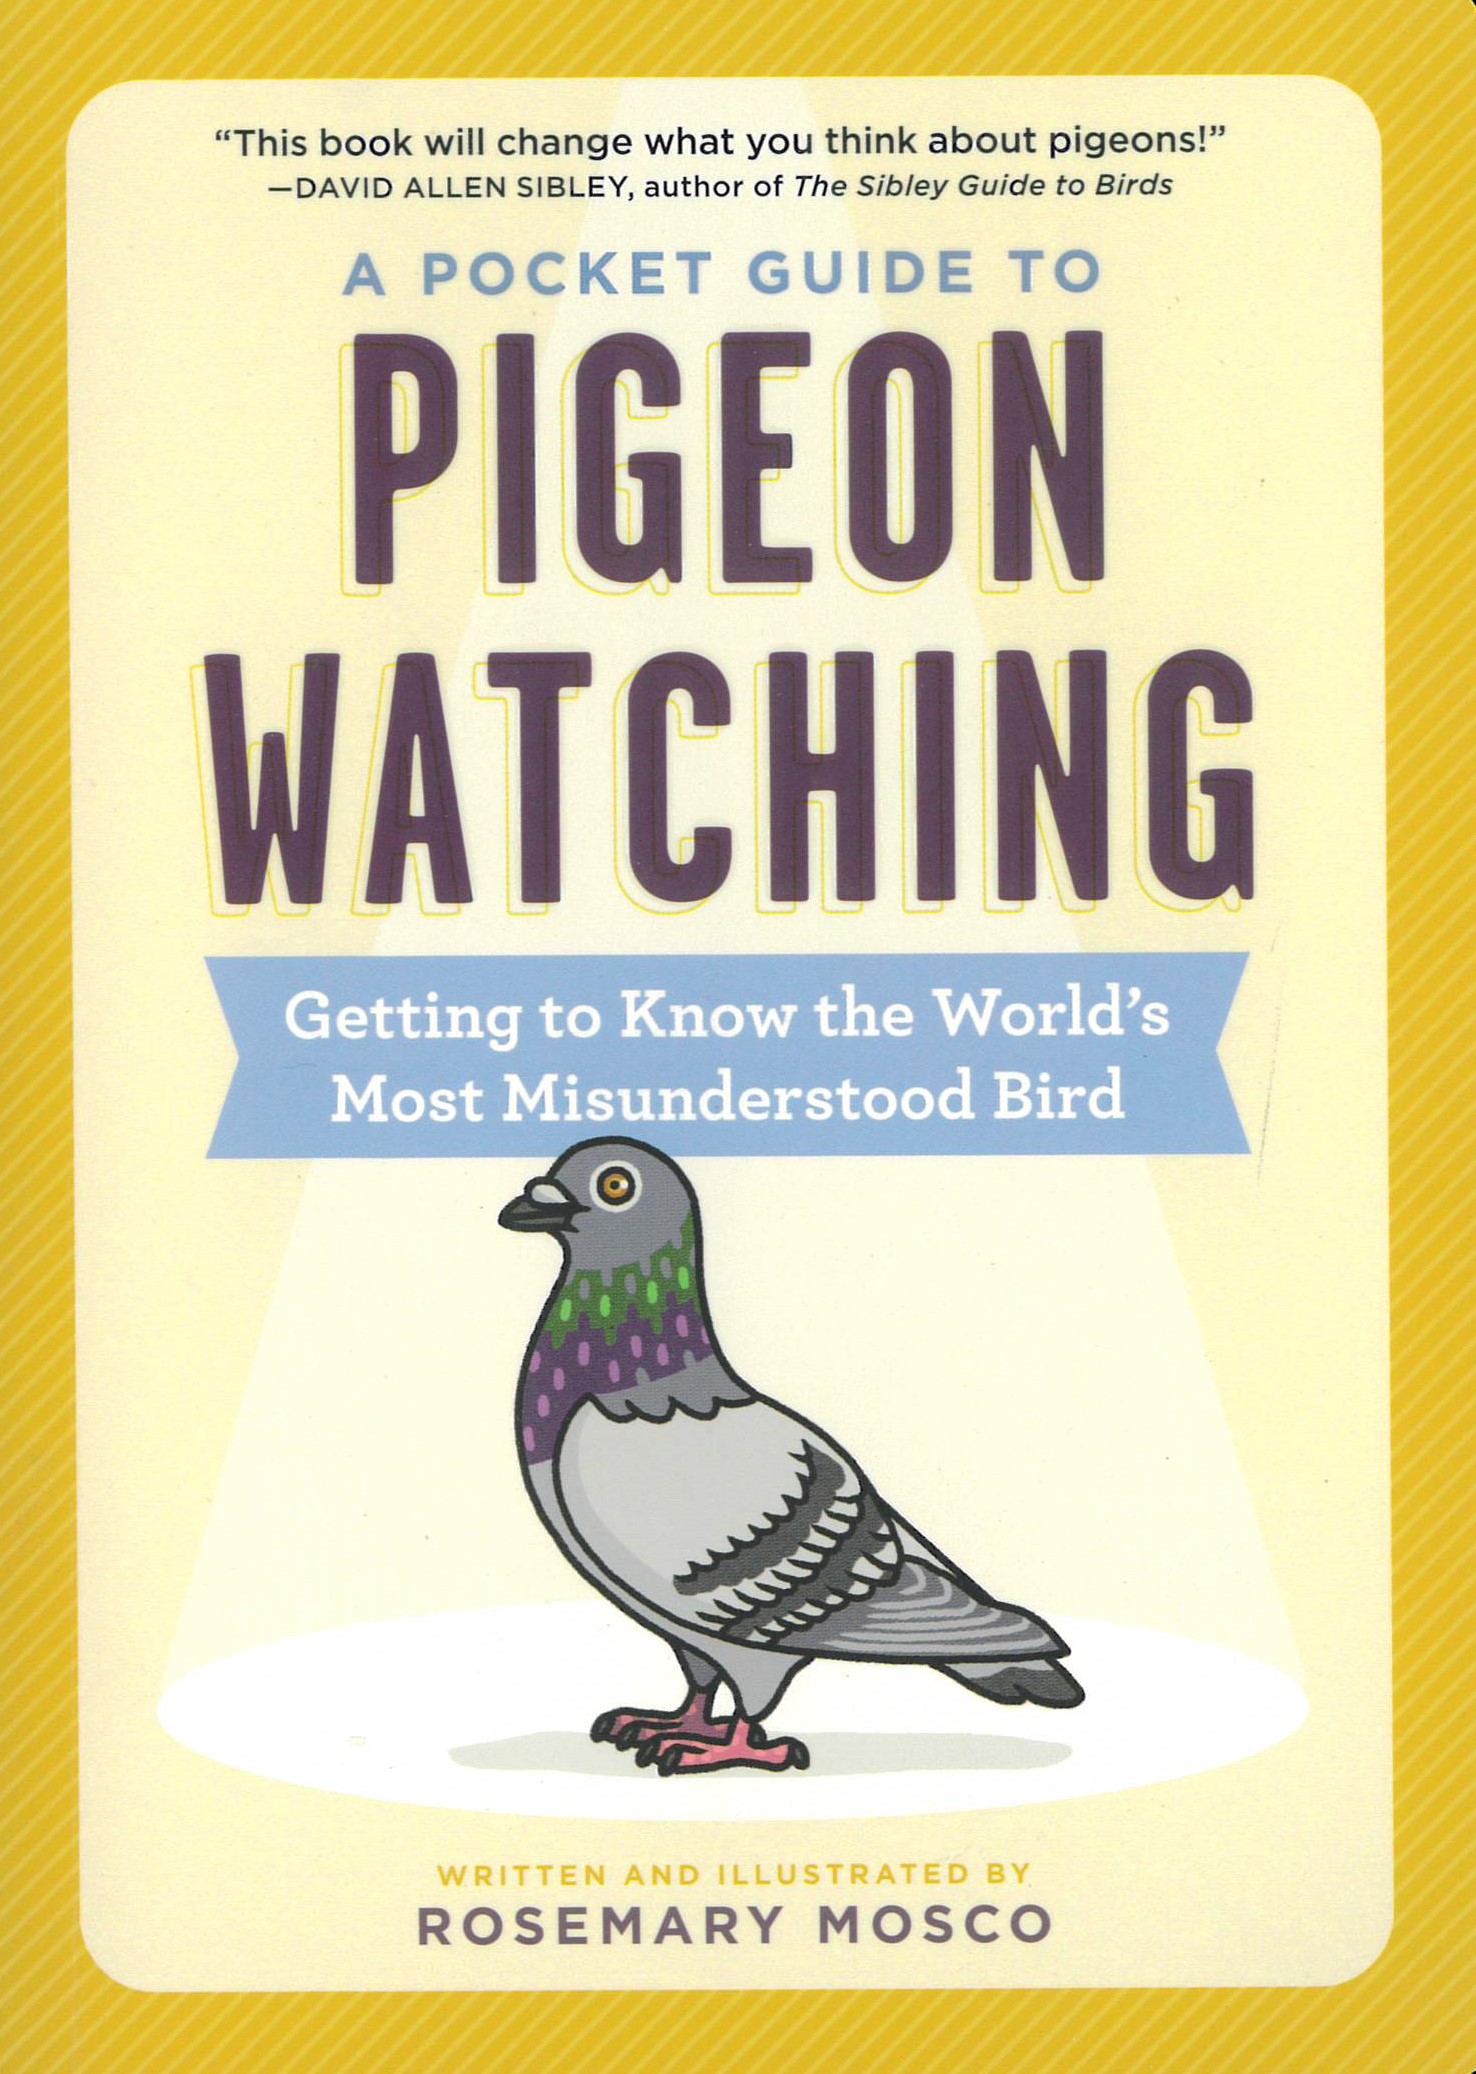 A pocket guide to pigeon watching : getting to know the world